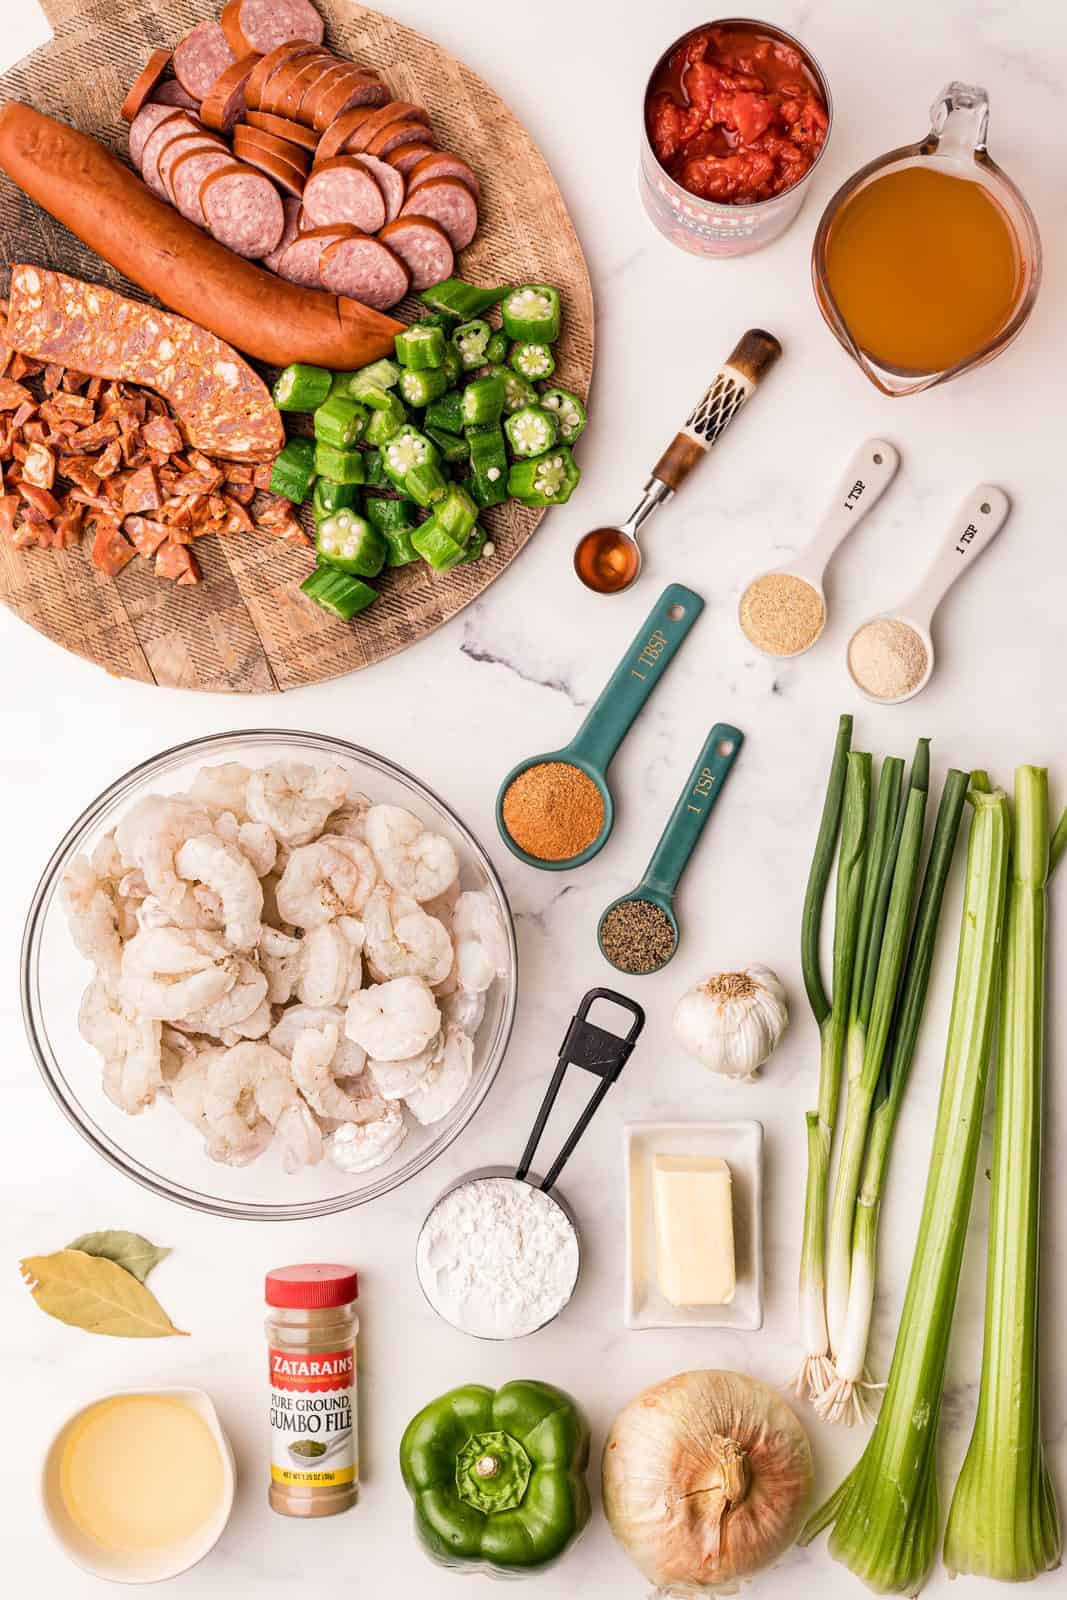 Ingredients needed: butter, canola oil, all-purpose flour, sweet onion, green bell pepper, celery ribs, garlic, bay leaves, fire roasted tomatoes, seafood stock, pepper, salt, creole seasoning, andouille sausage, smoked sausage, okra, shrimp and crab boil, shrimp, green onions and gumbo file